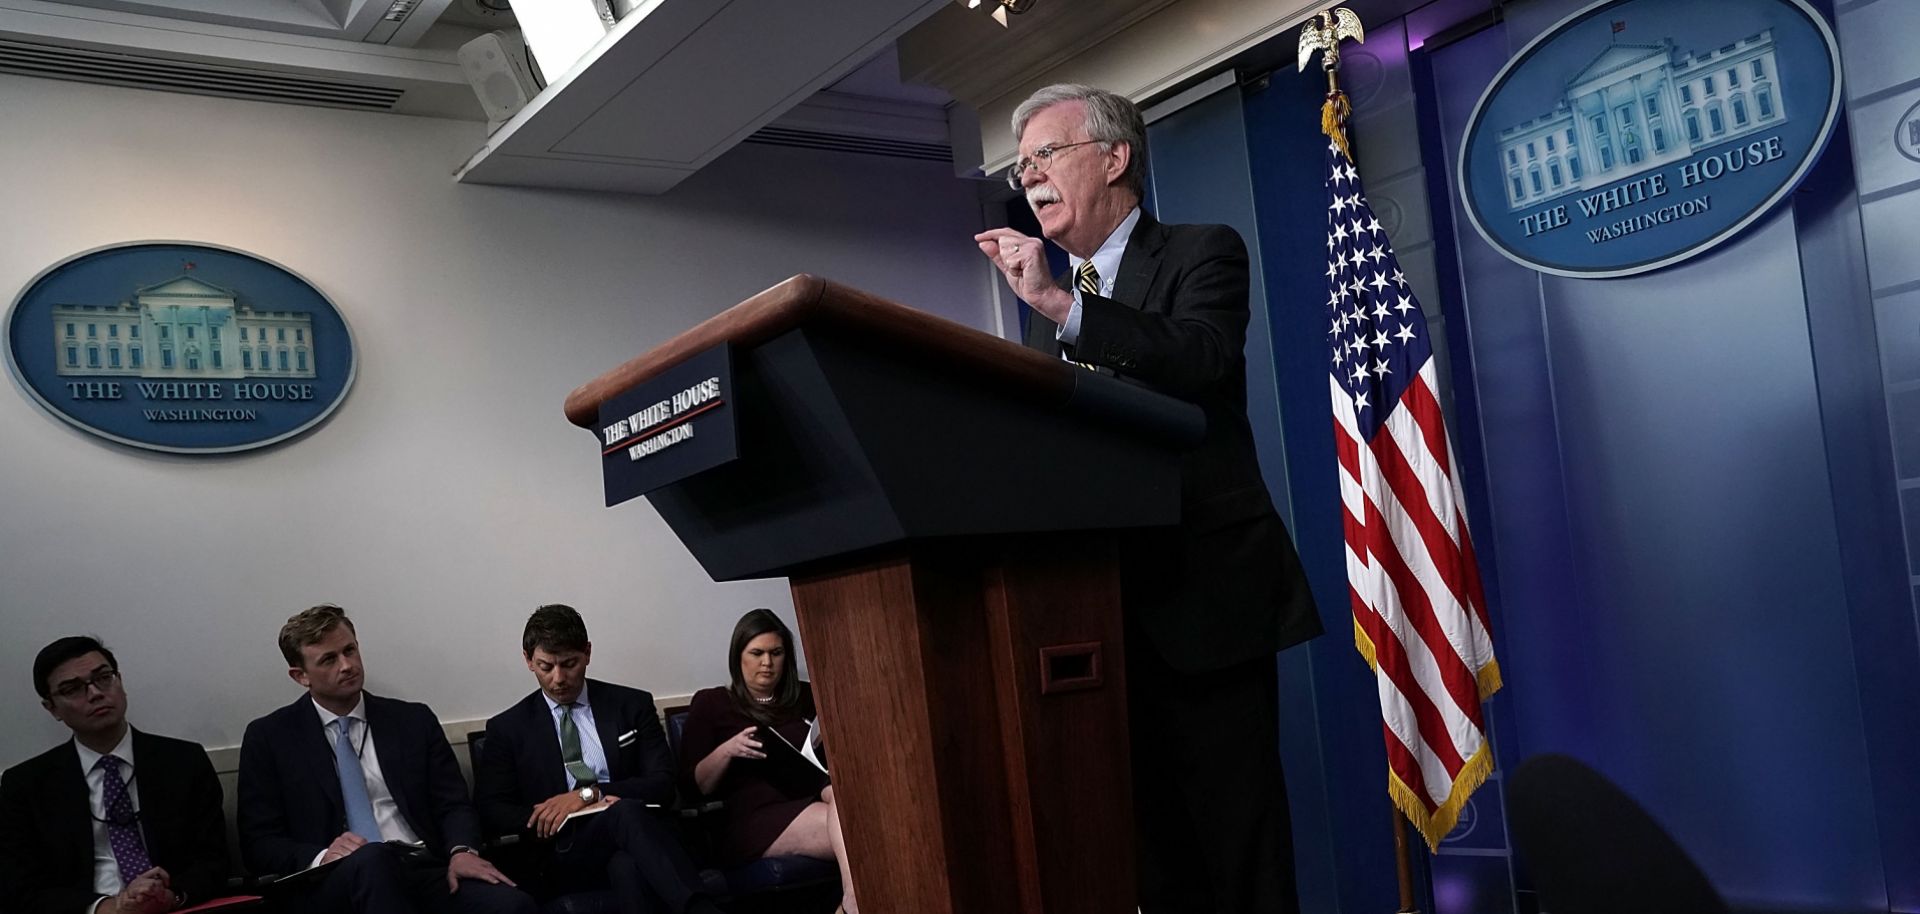 U.S. national security adviser John Bolton speaks during a White House news briefing on Oct. 3, 2018.